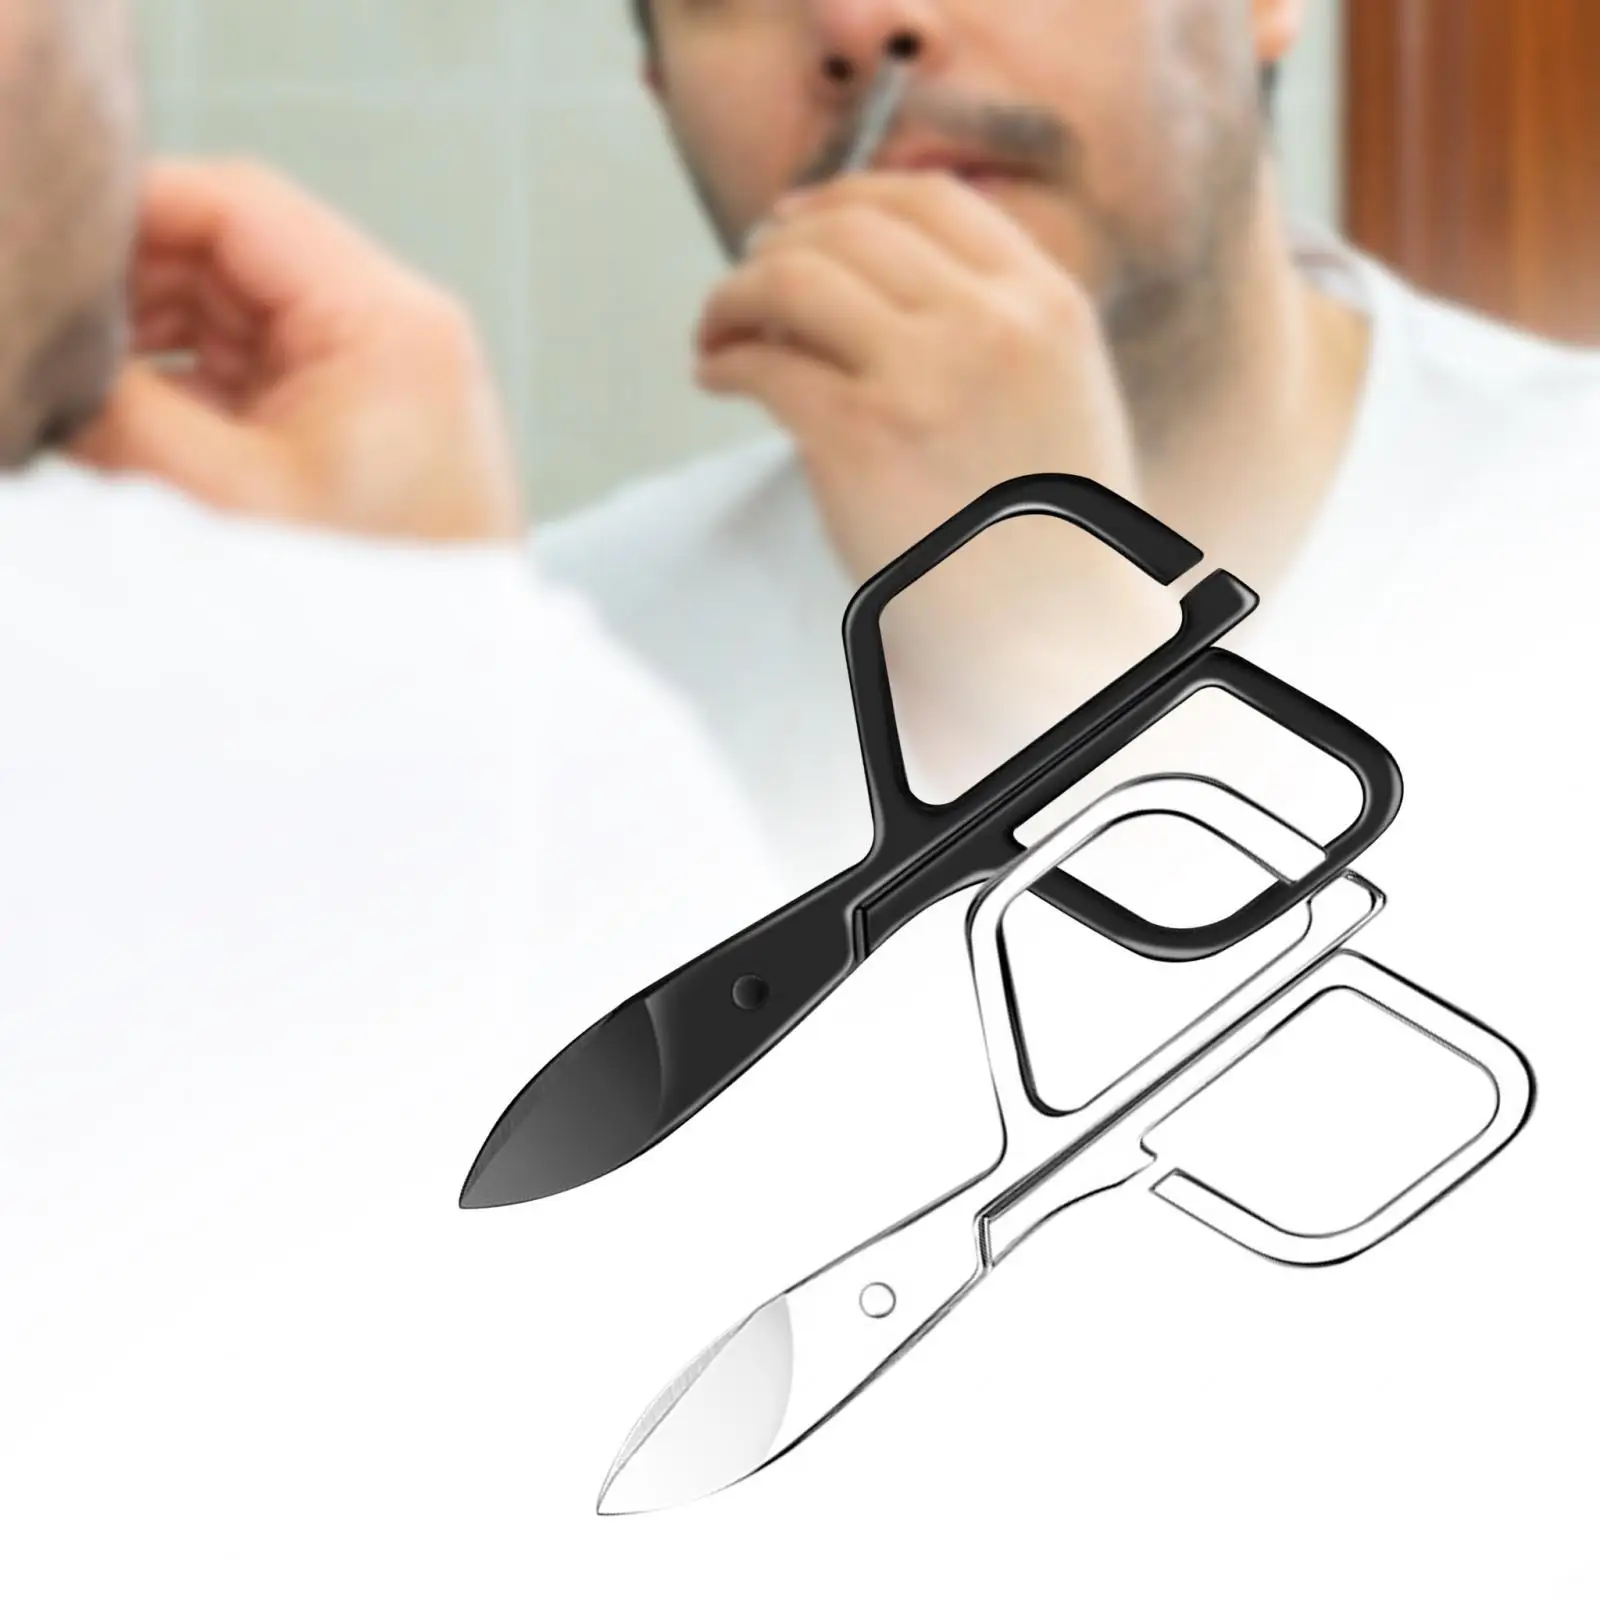 Nose Hair Scissors Waterproof Hair Cutting Simple Facial Hair Small Grooming Scissors for Ear Trimming Mustache Eyebrow Trimming